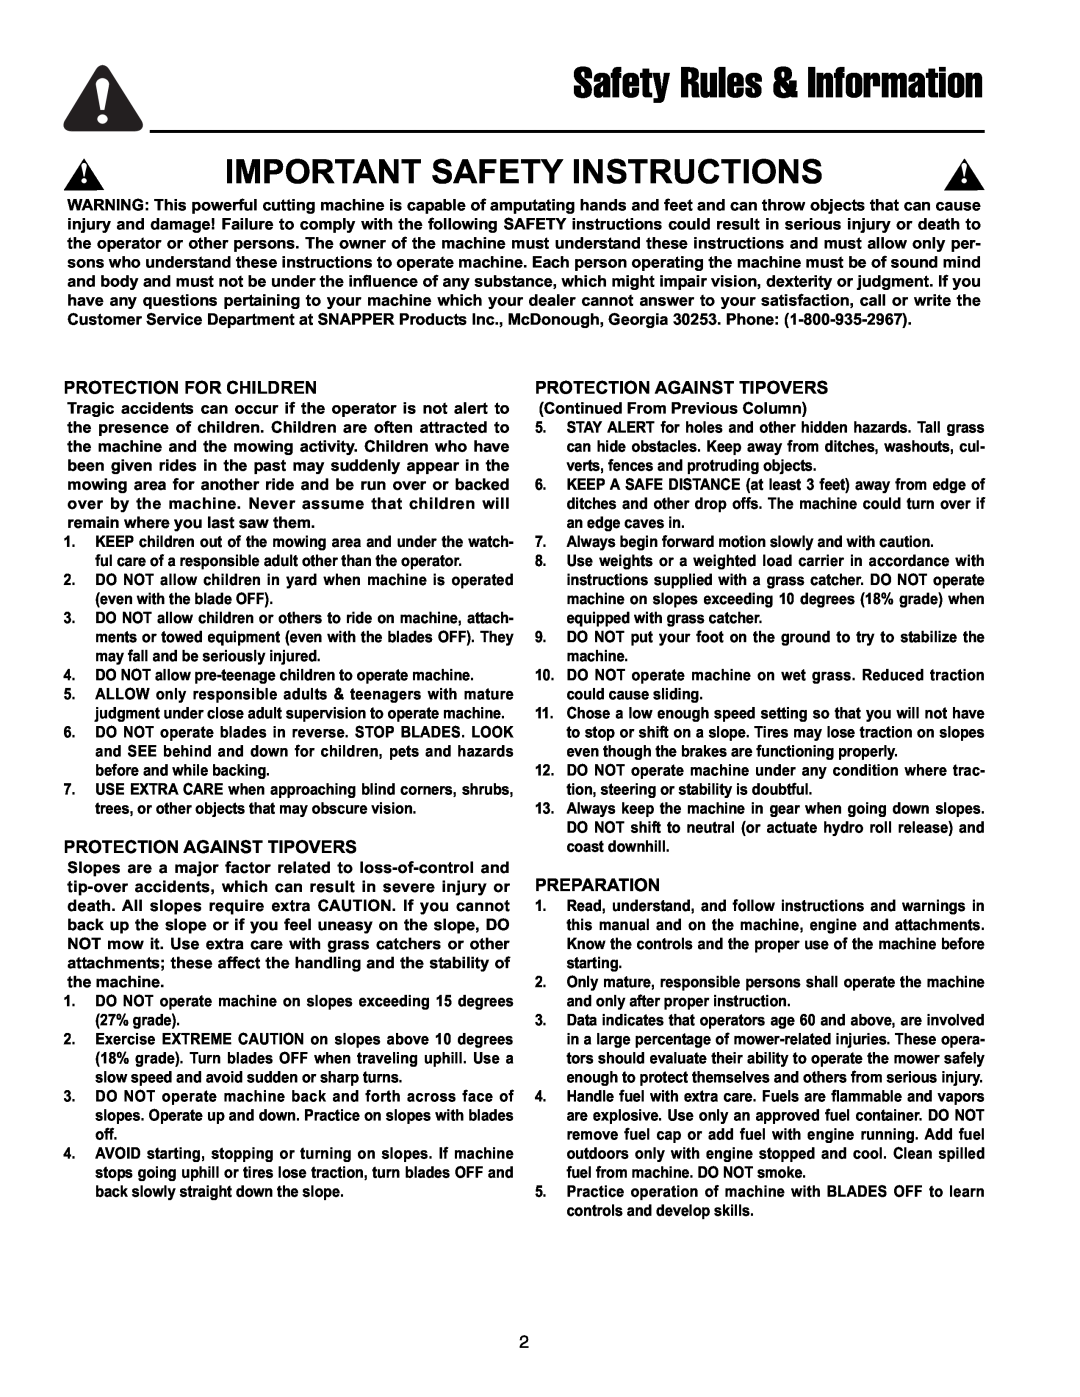 Snapper RZT20440BVE2 manual Safety Rules & Information, Important Safety Instructions, Protection For Children, Preparation 